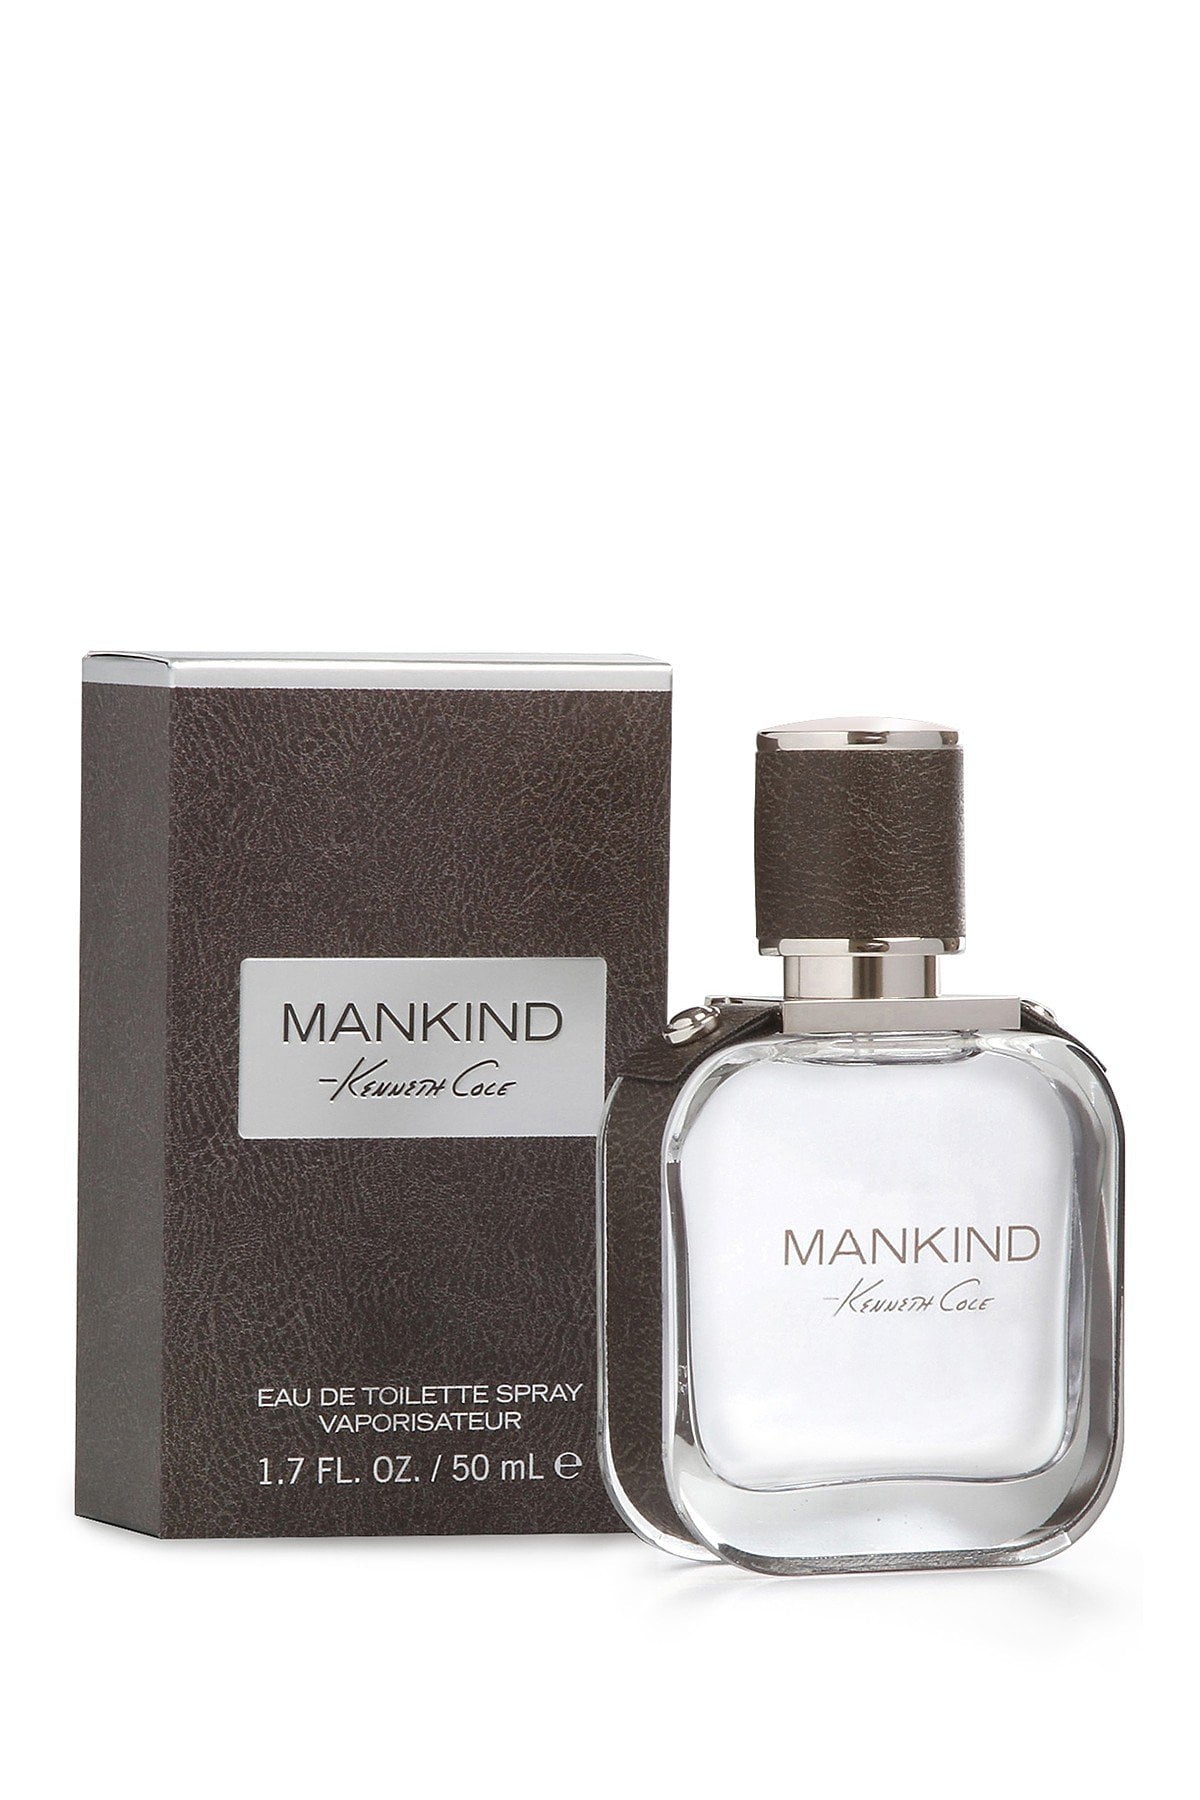 Mankind by Kenneth Cole for Men, Product image 1